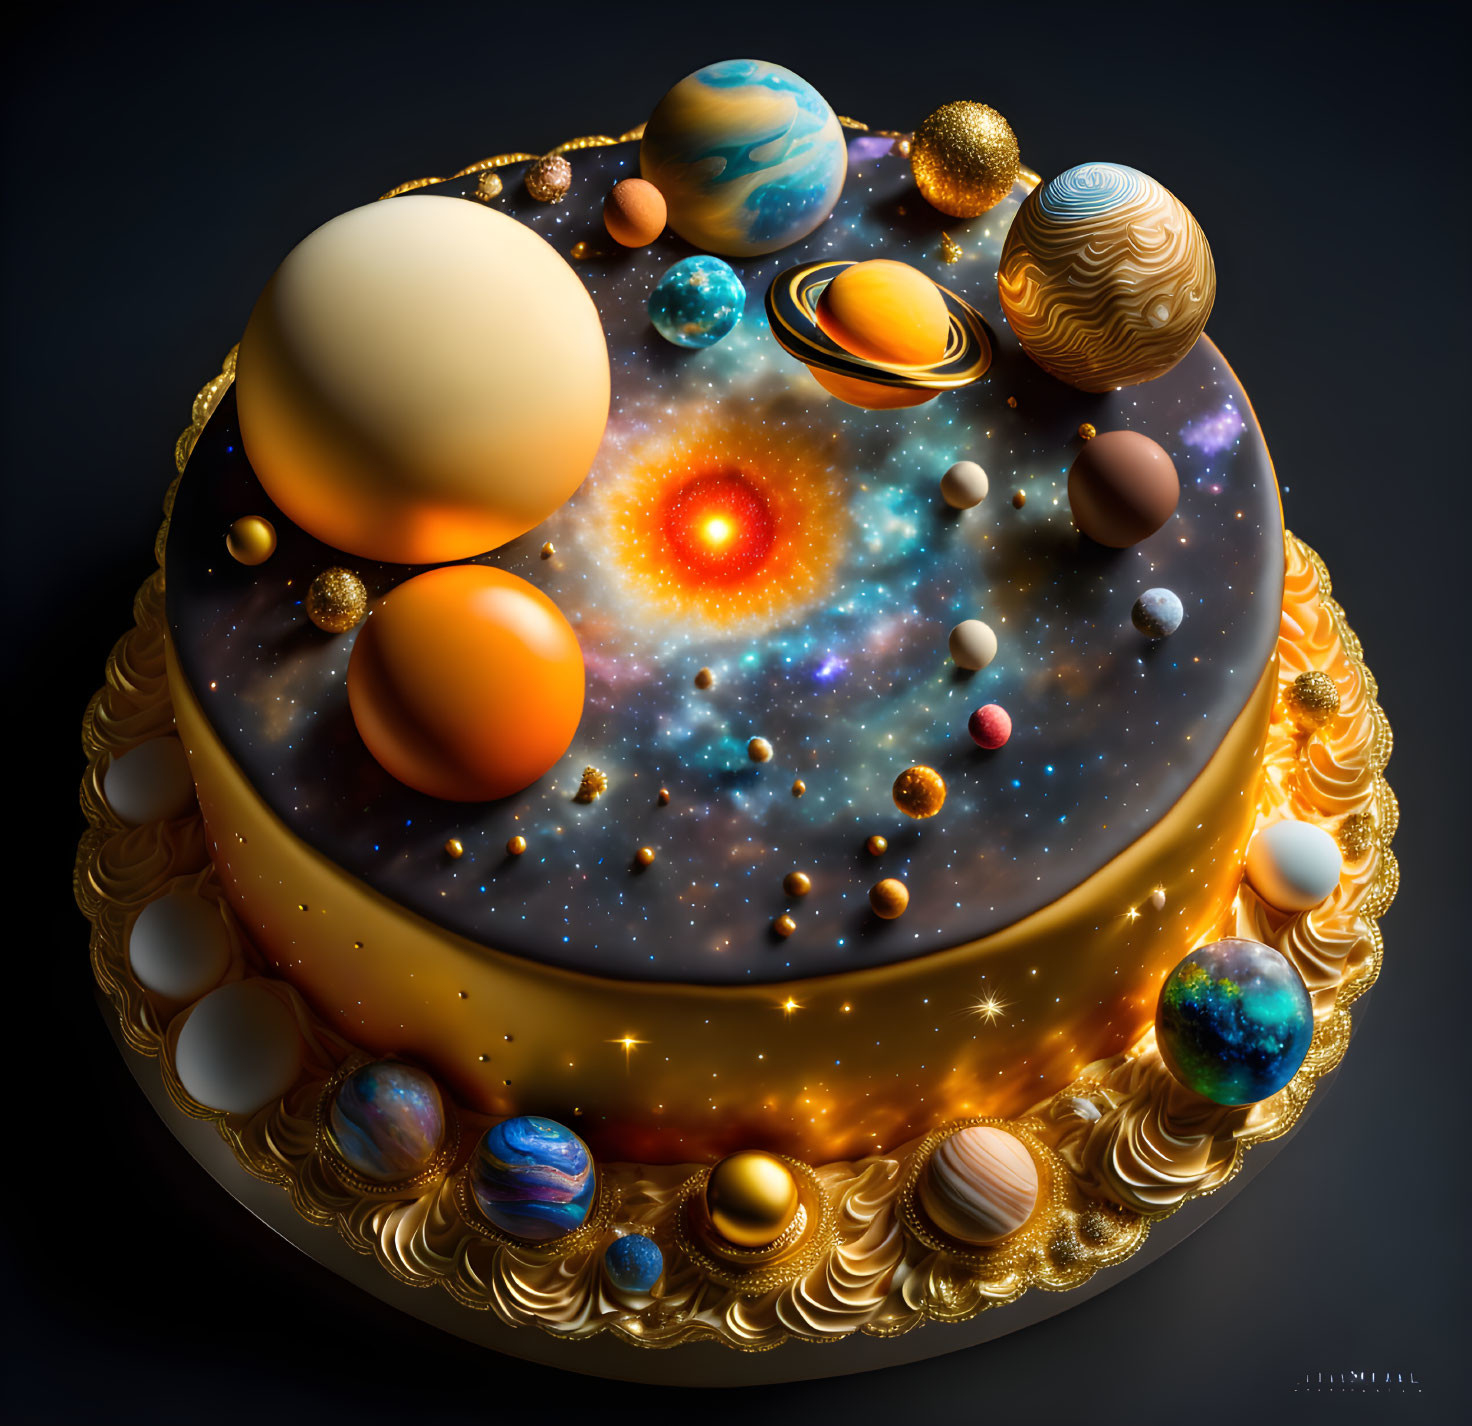 Cosmic-themed cake with planets, stars, and galaxy design